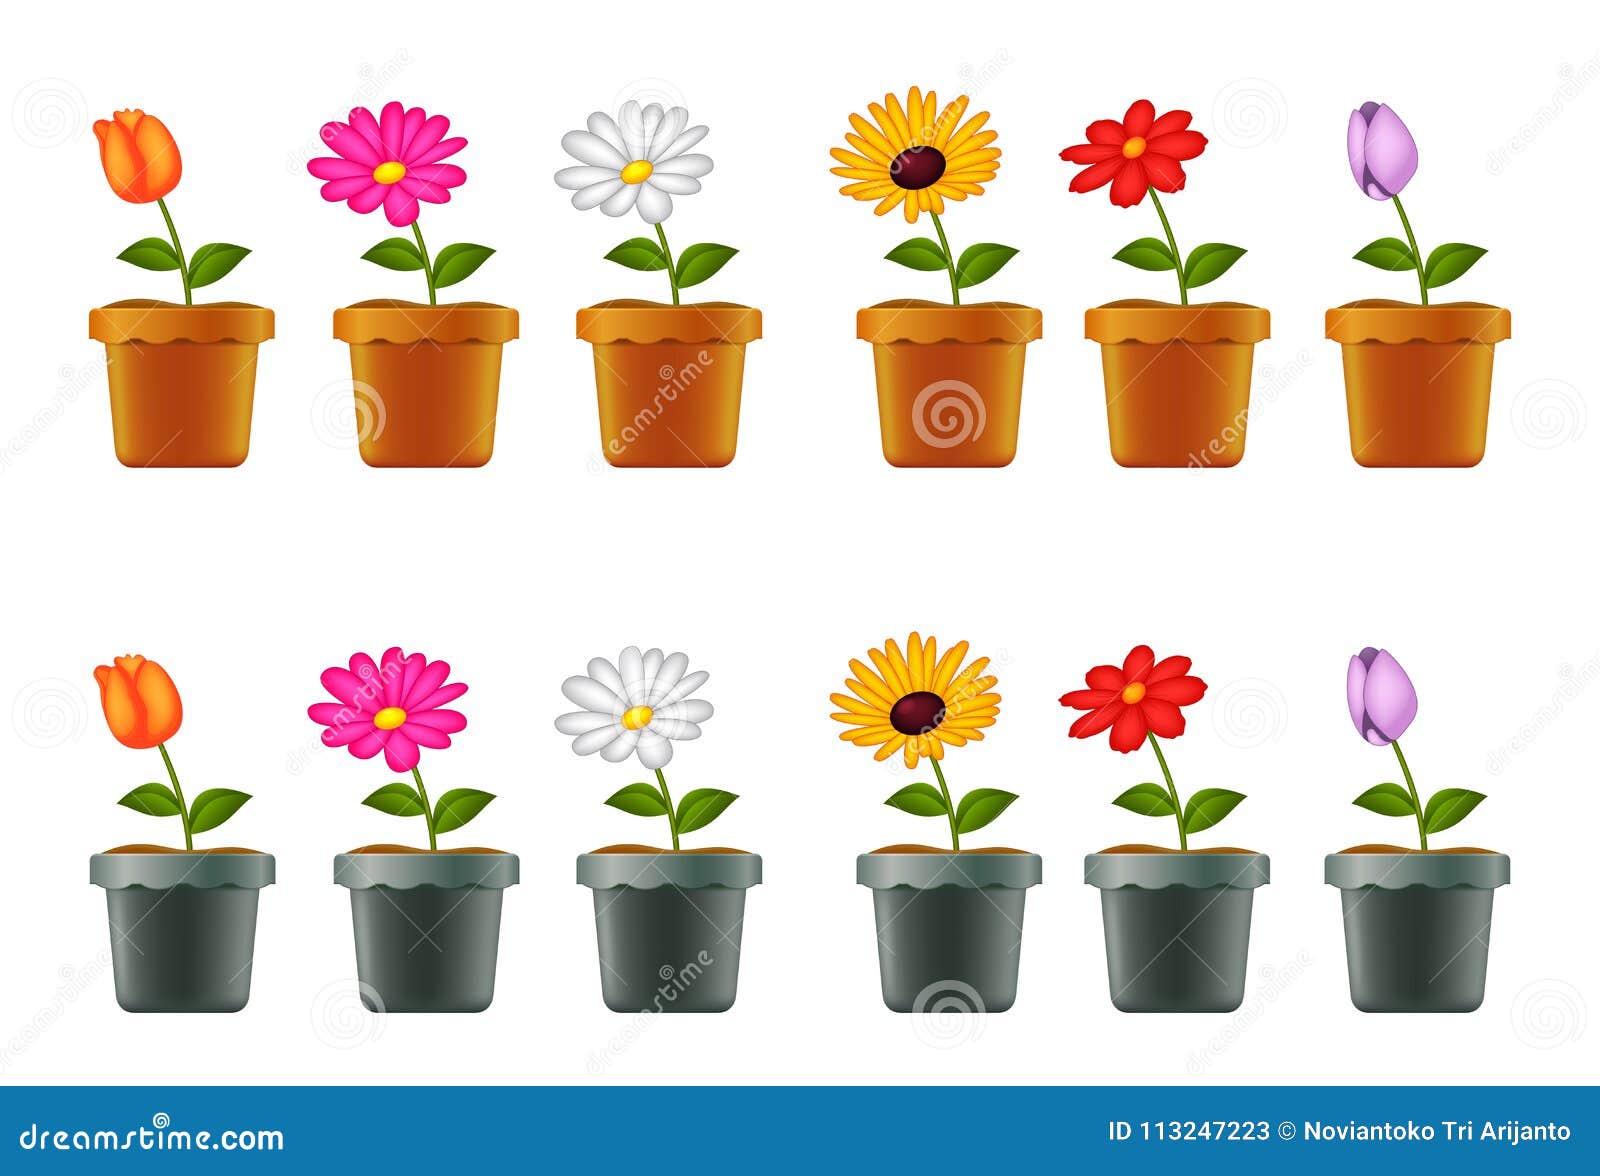 Different Types of Flowers in Pots Stock Vector - Illustration of ...